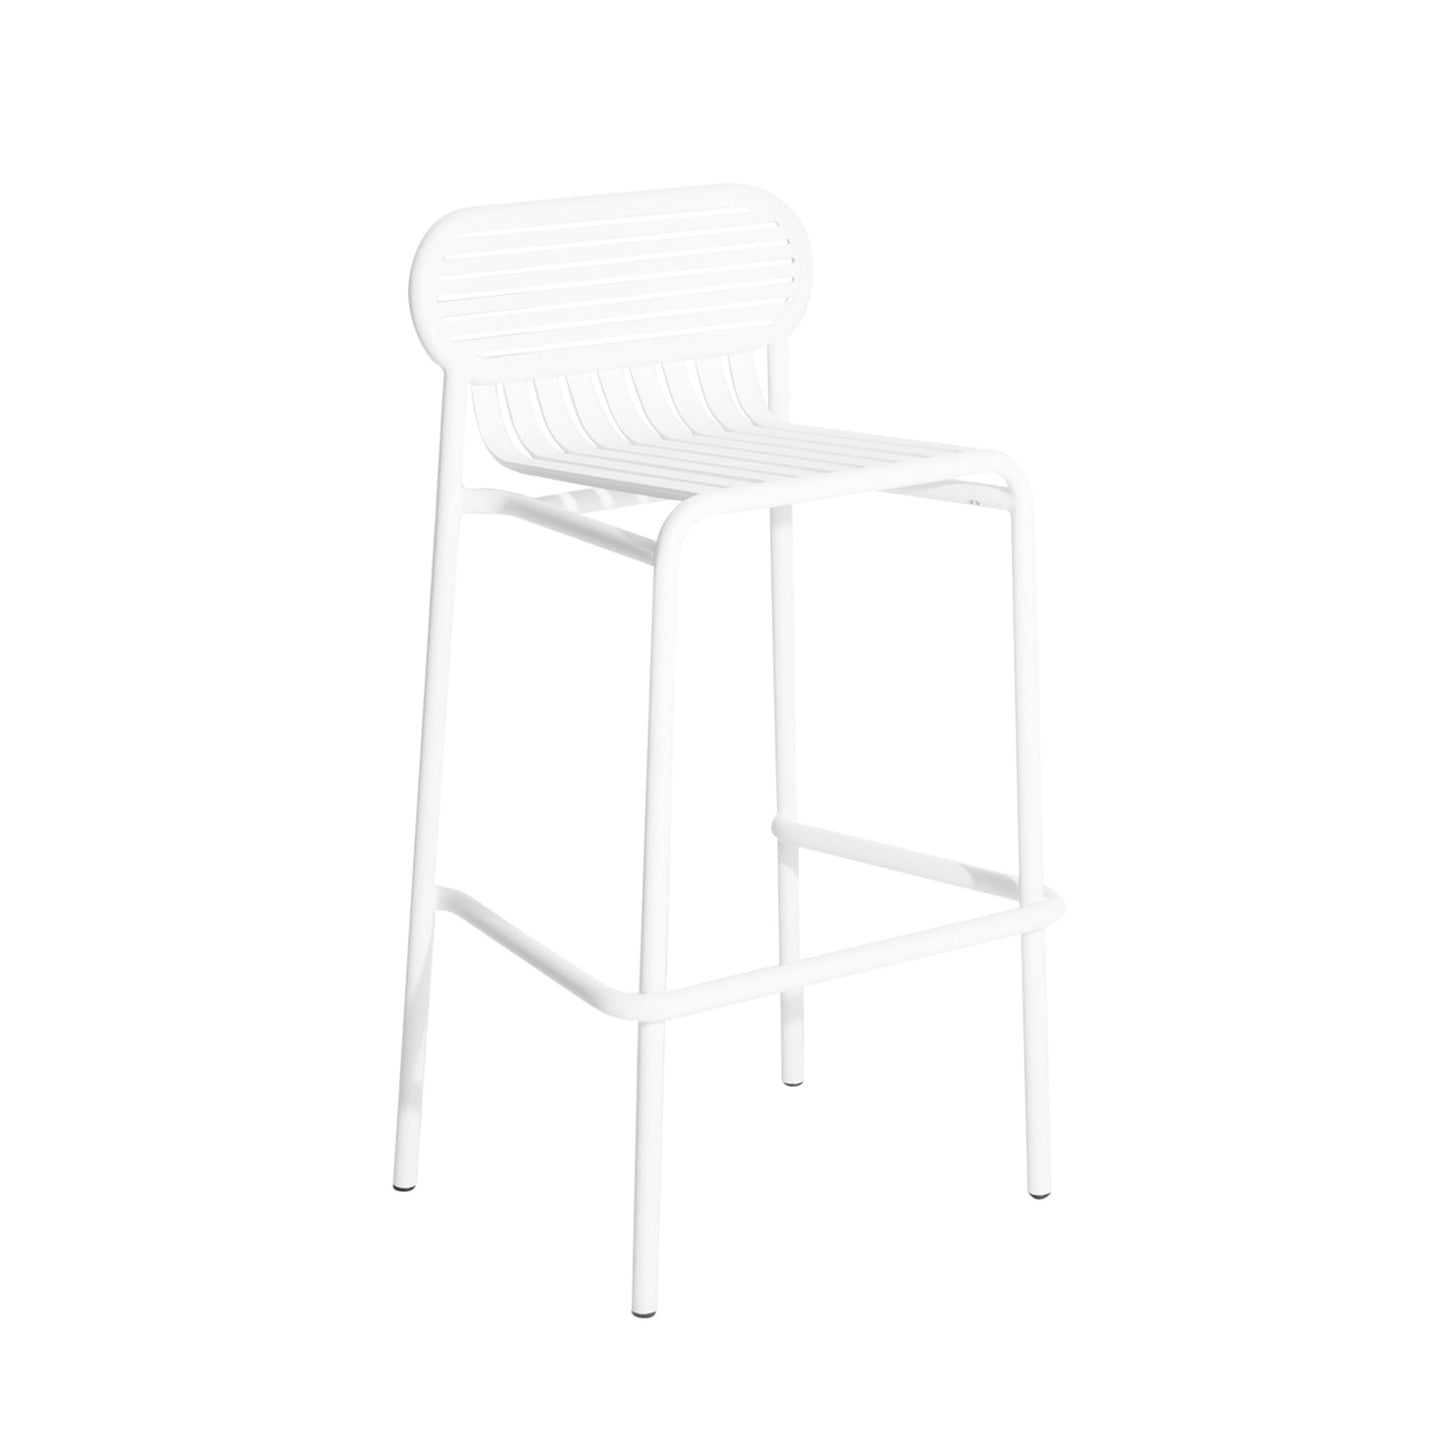 WEEK-END Bar Stool H80 by Petite Friture #White